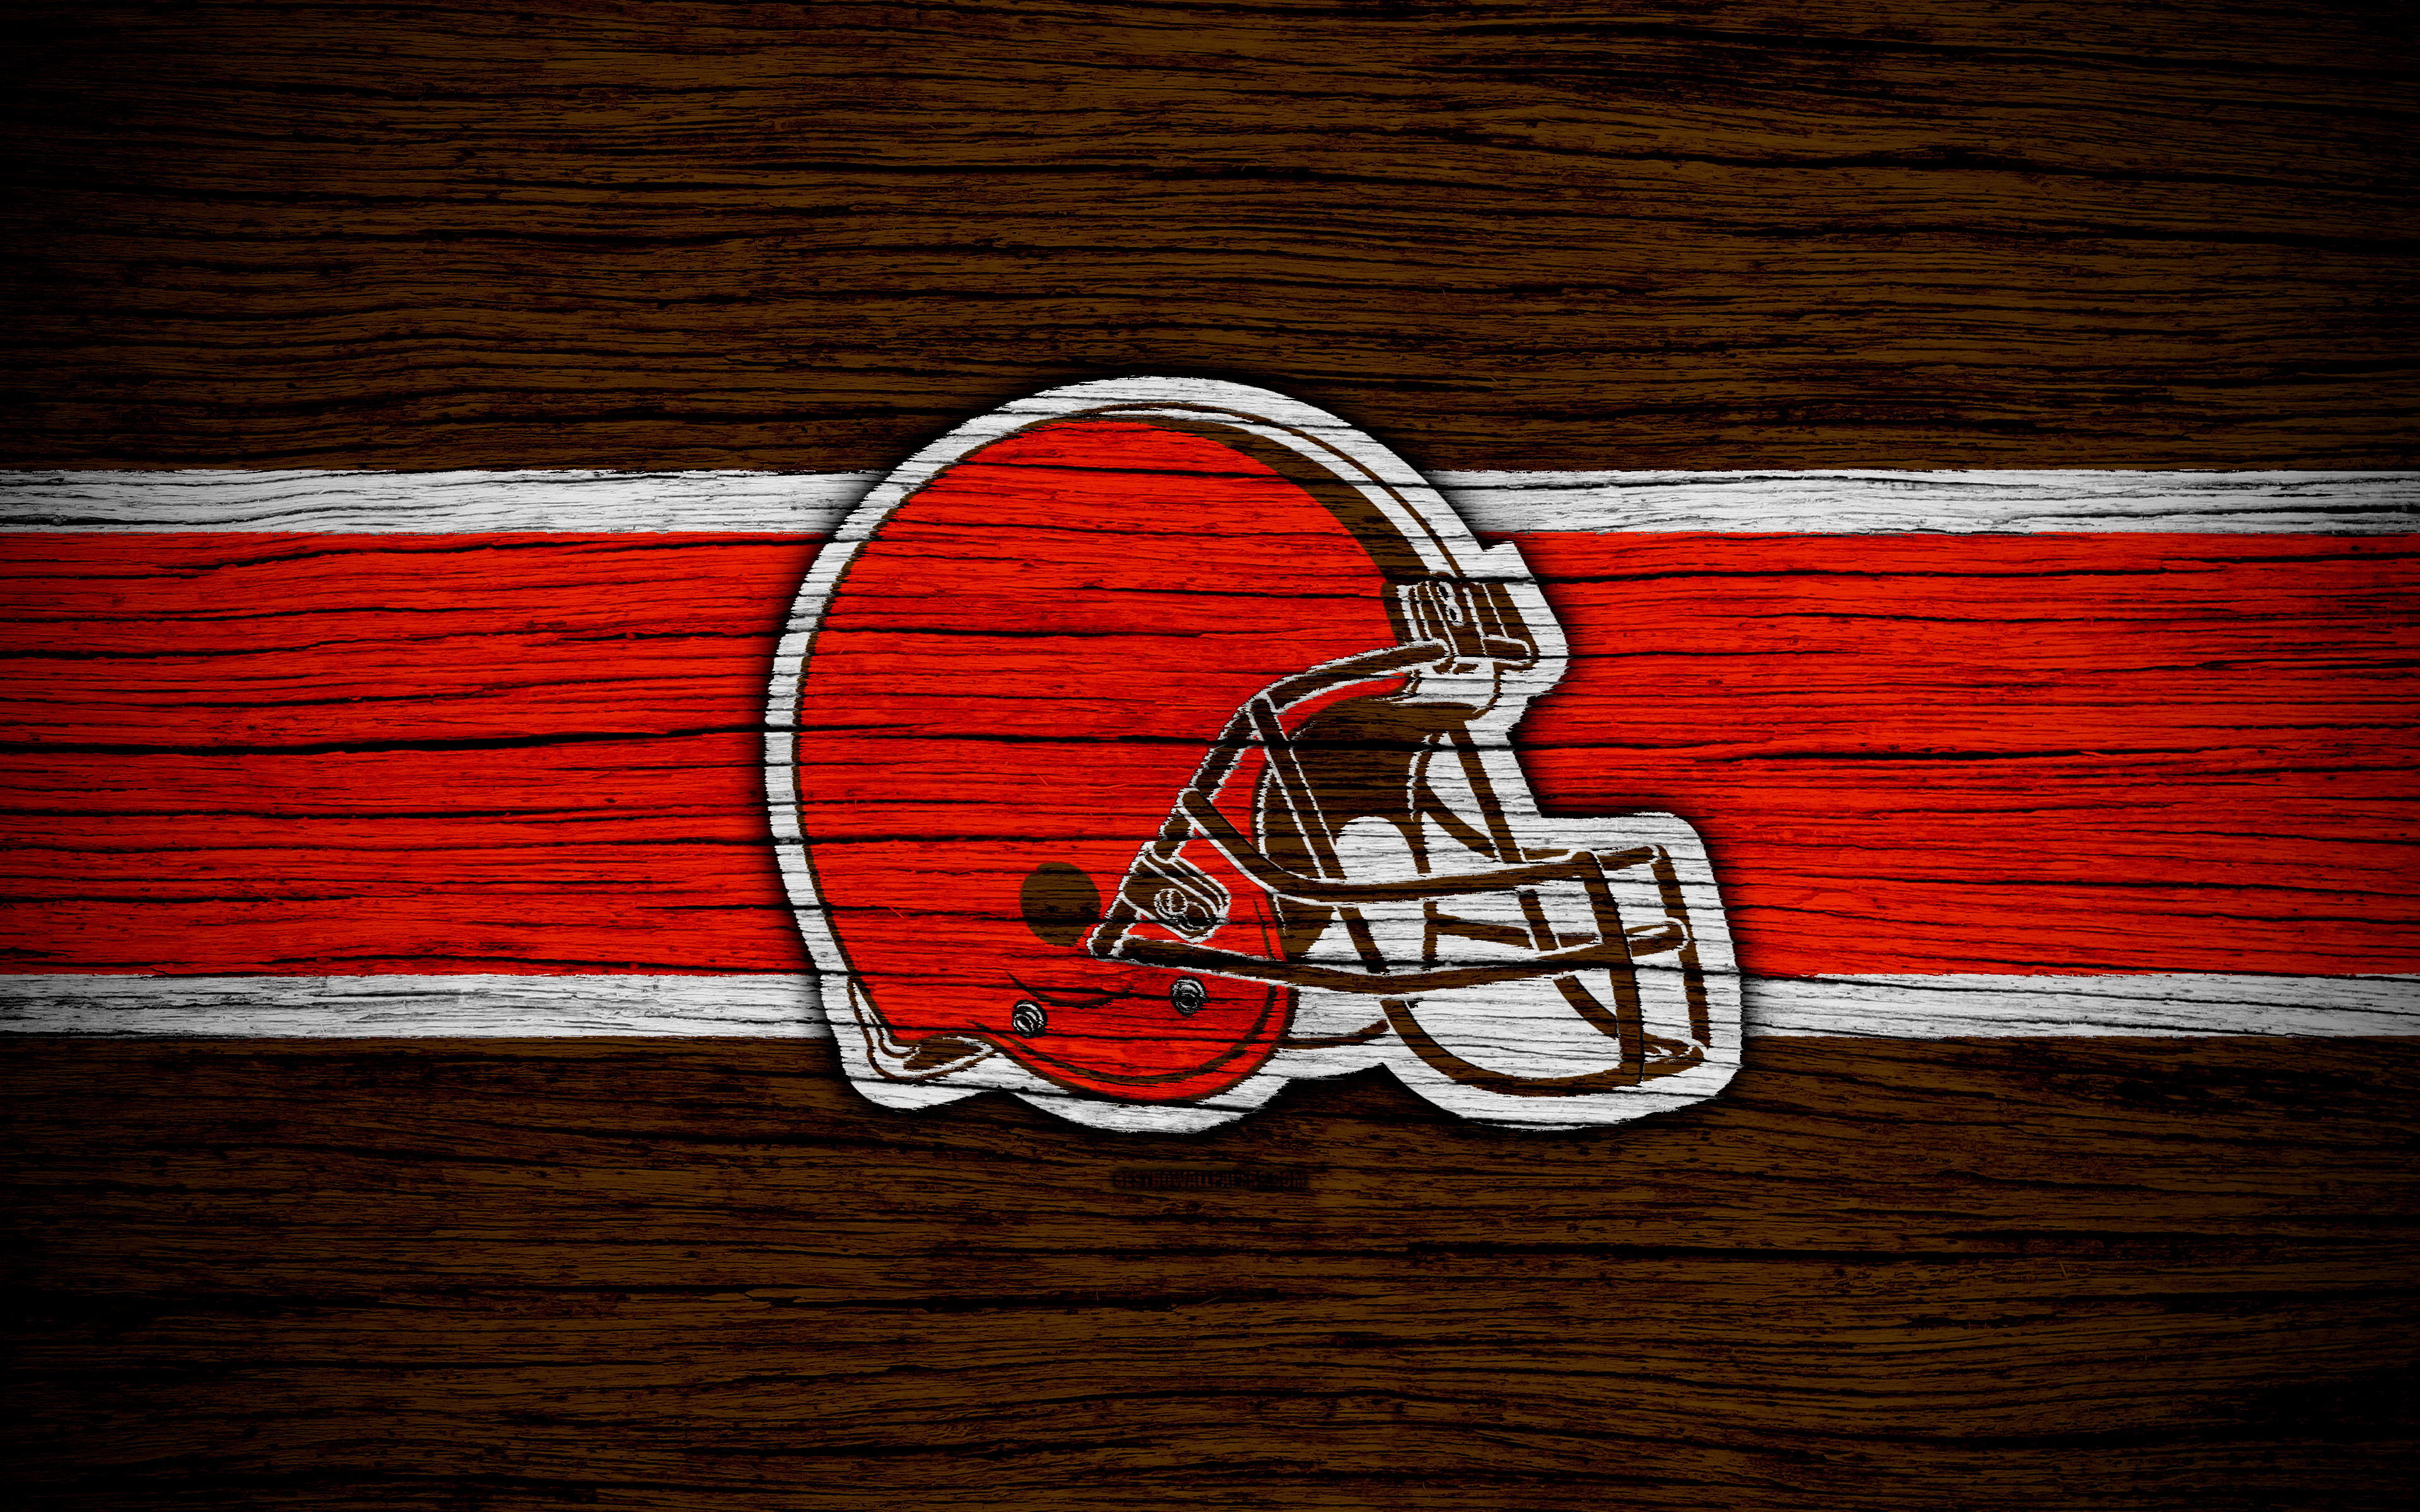 Cleveland Browns, Nfl, 4k, Wooden Texture, American And Uniforms Of The New York Jets